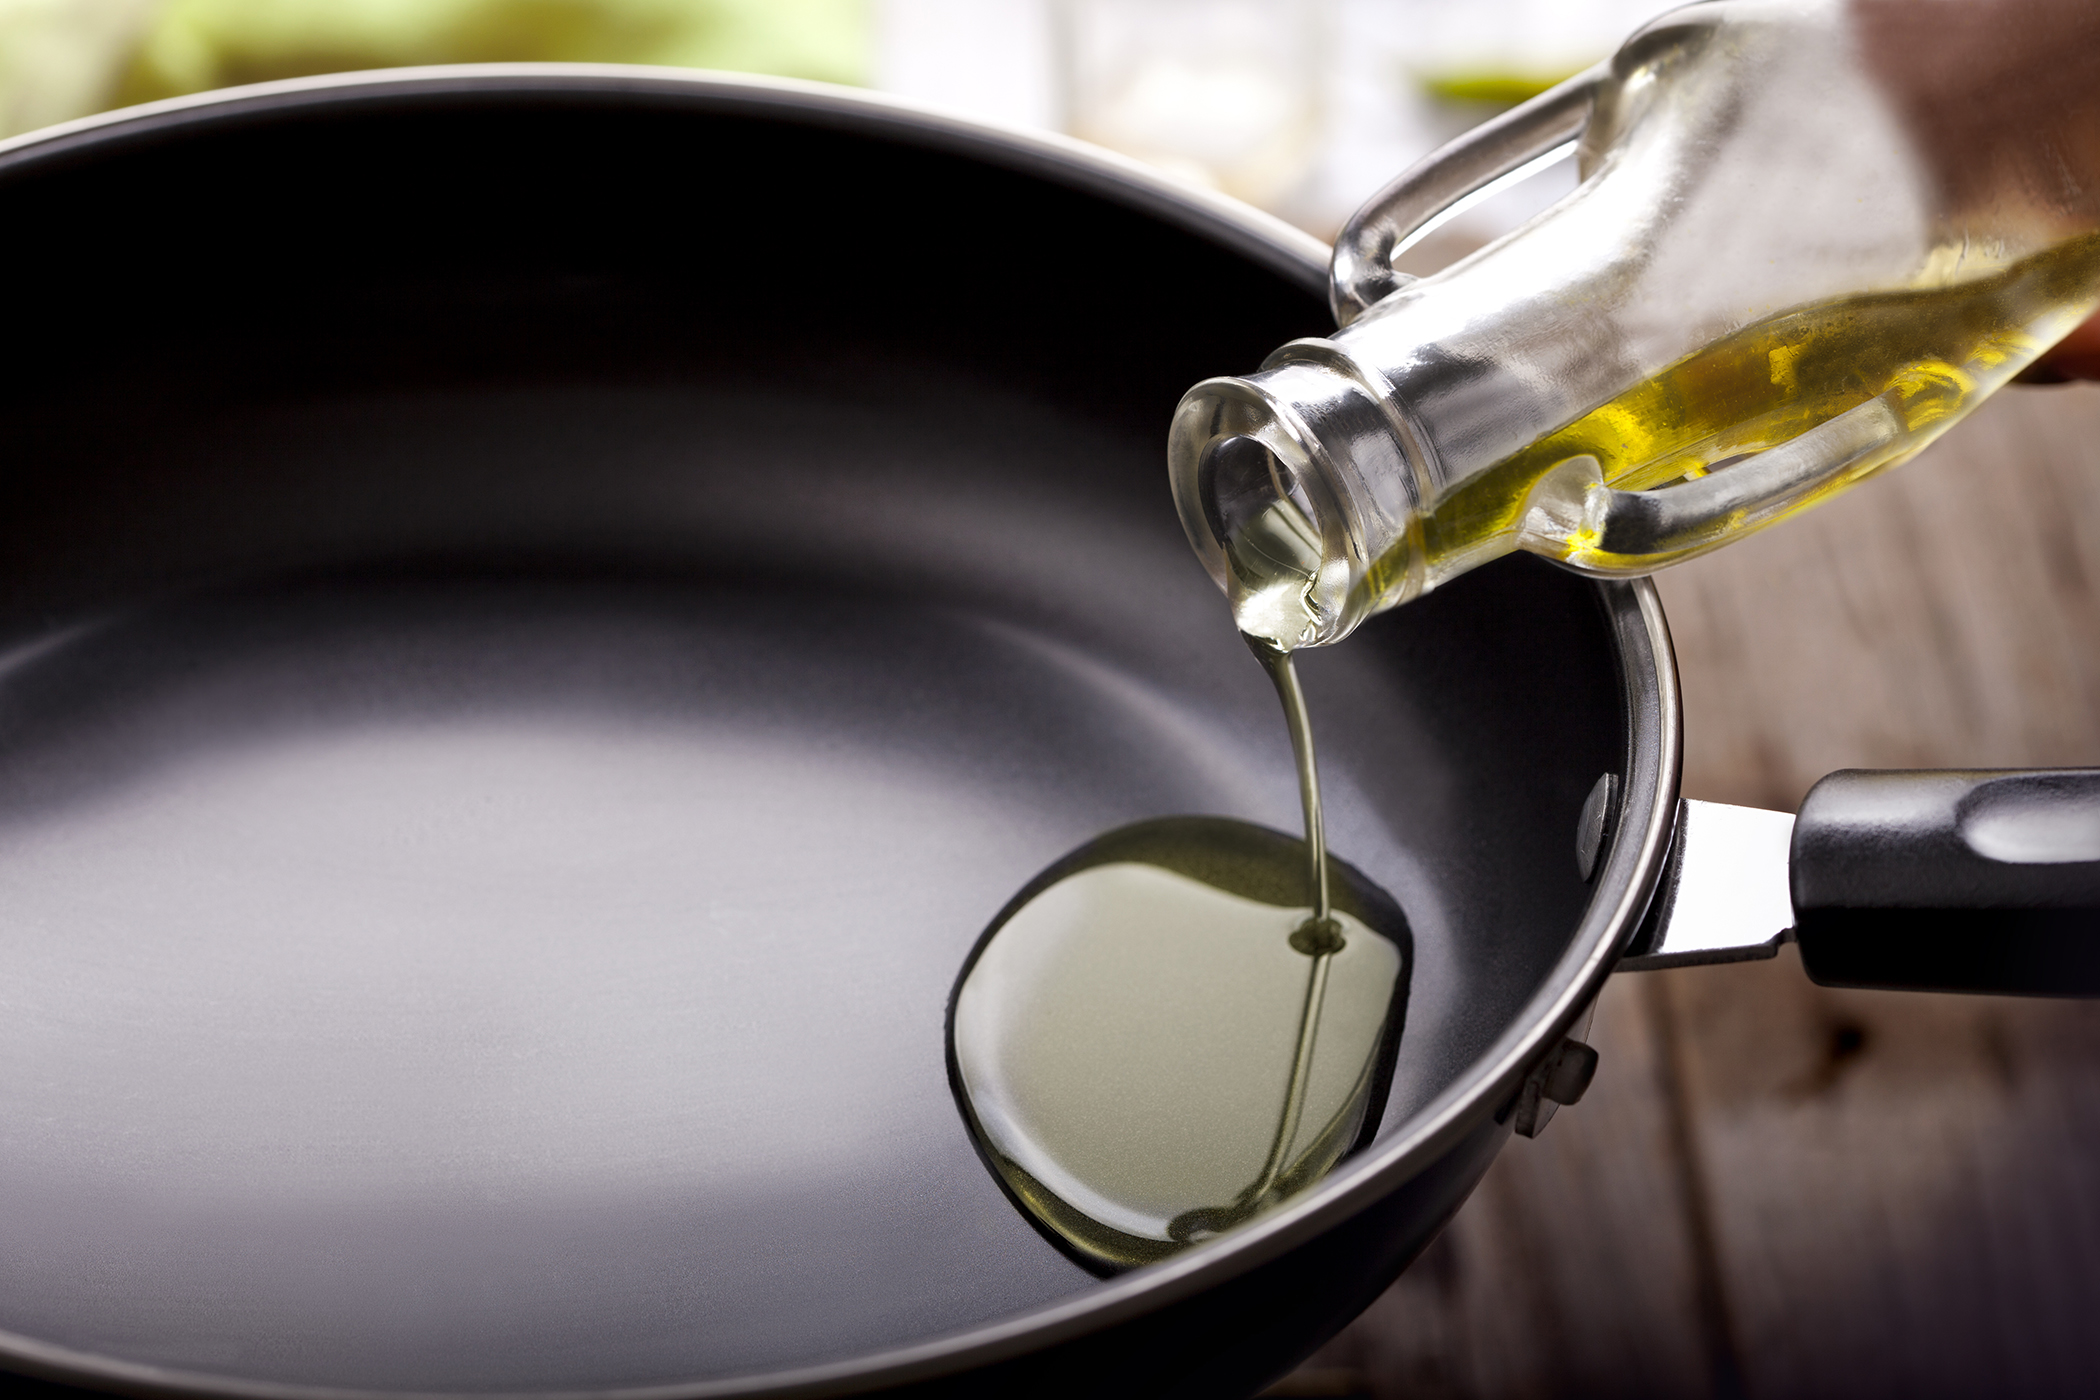 That Olive Oil You're Cooking With? It's Probably Fake